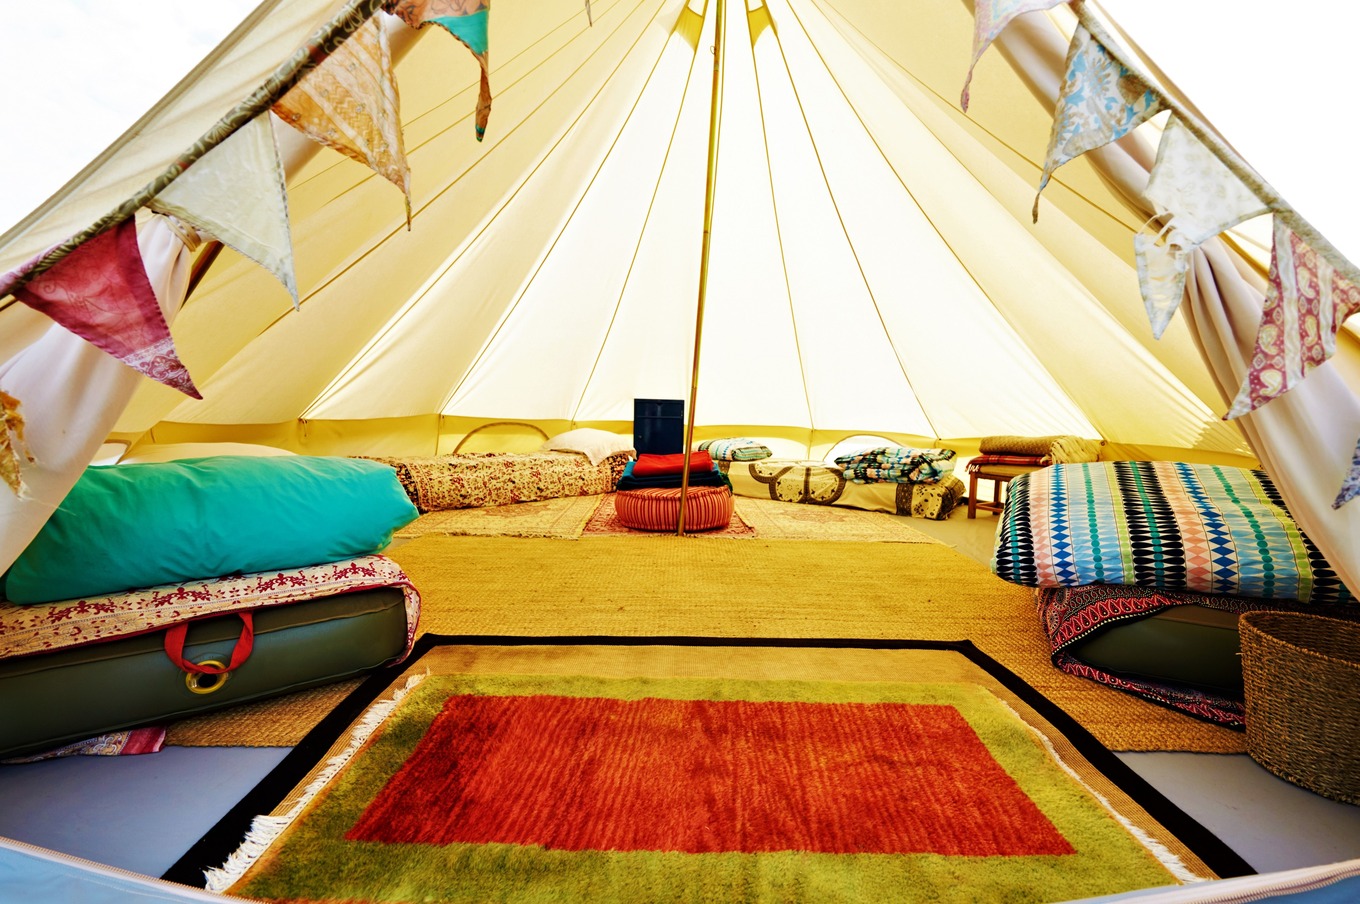 Interior View of a Modern Teepee Tent